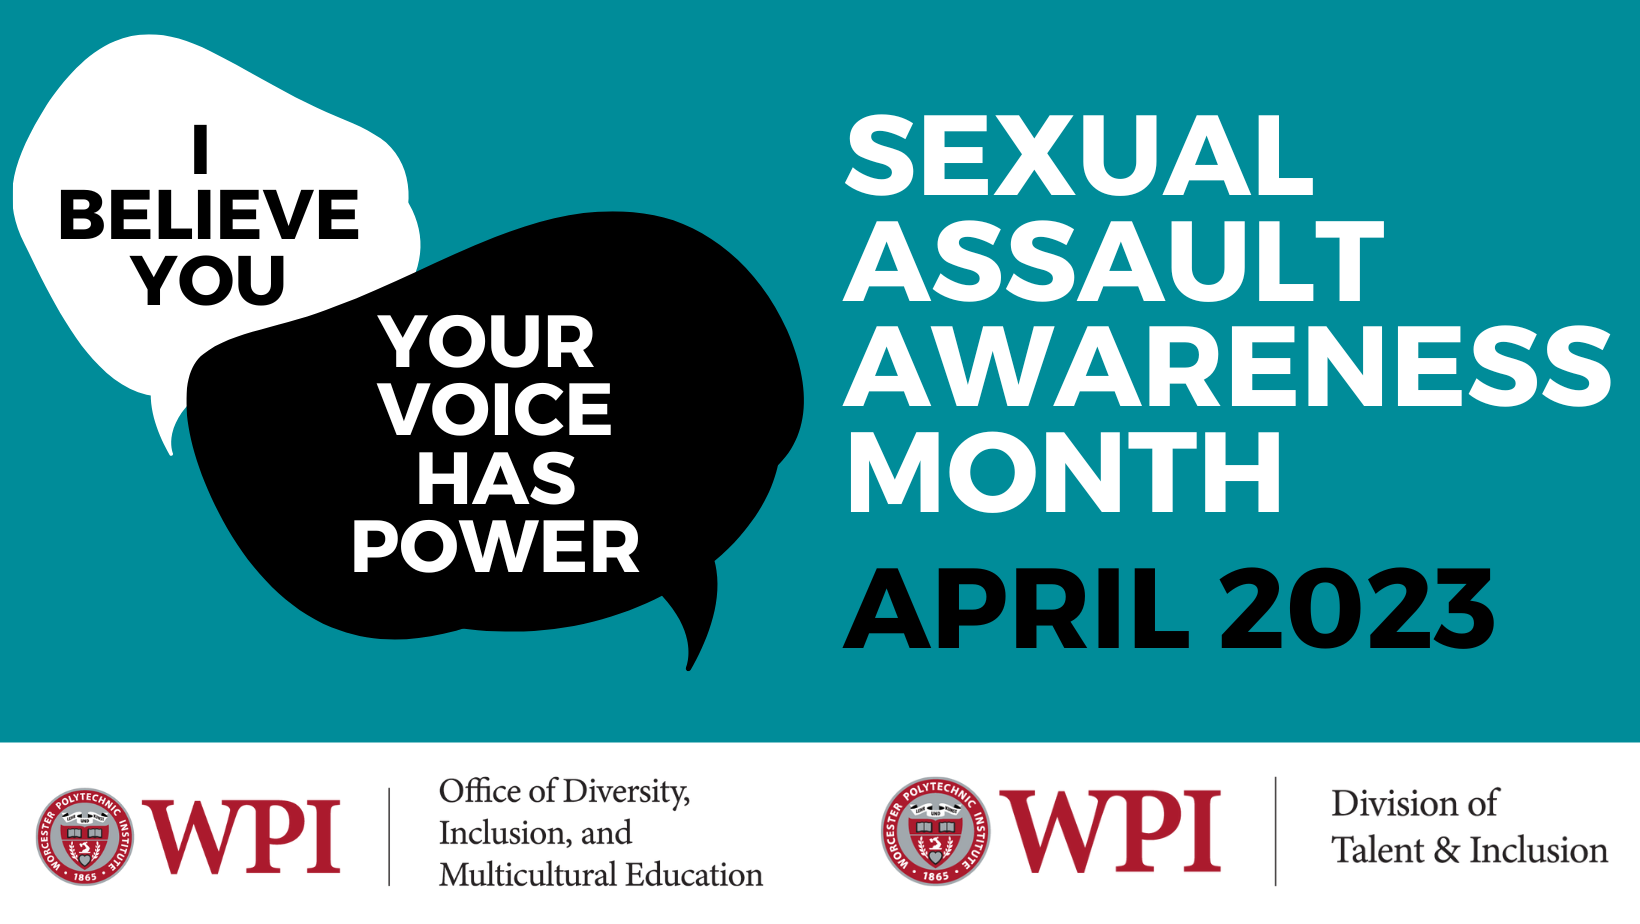 Wpi Recognizes Sexual Assault Awareness Month Worcester Polytechnic Institute